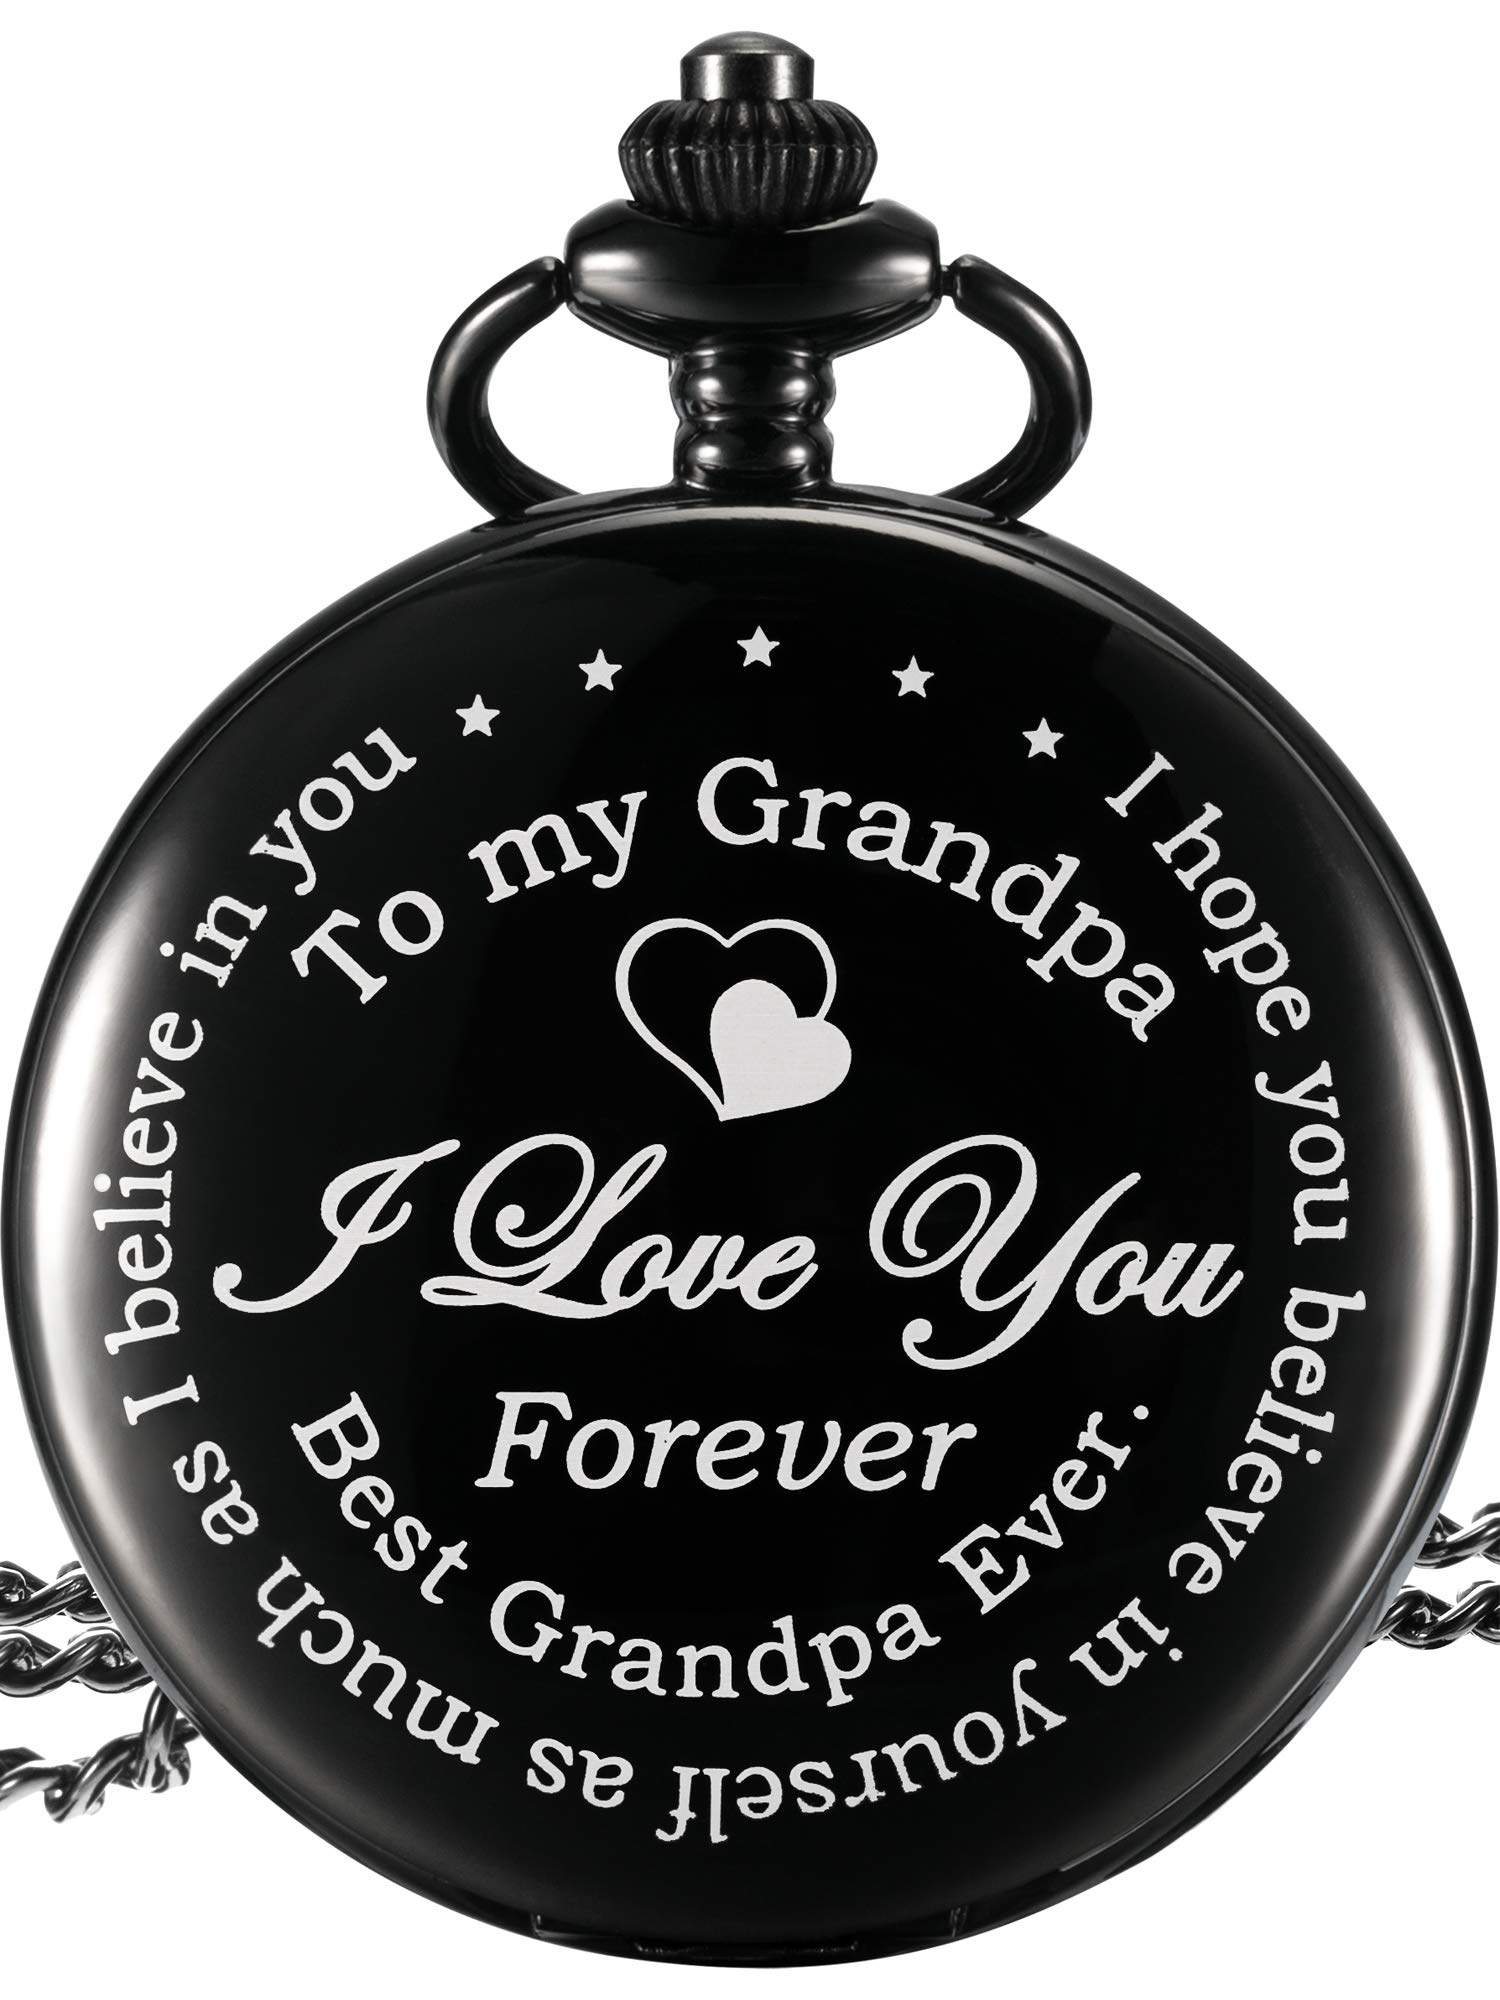 Hicarer Grandpa Pocket Watch, Father's Day Meaningful Grandpa Birthday Christmas Supplies